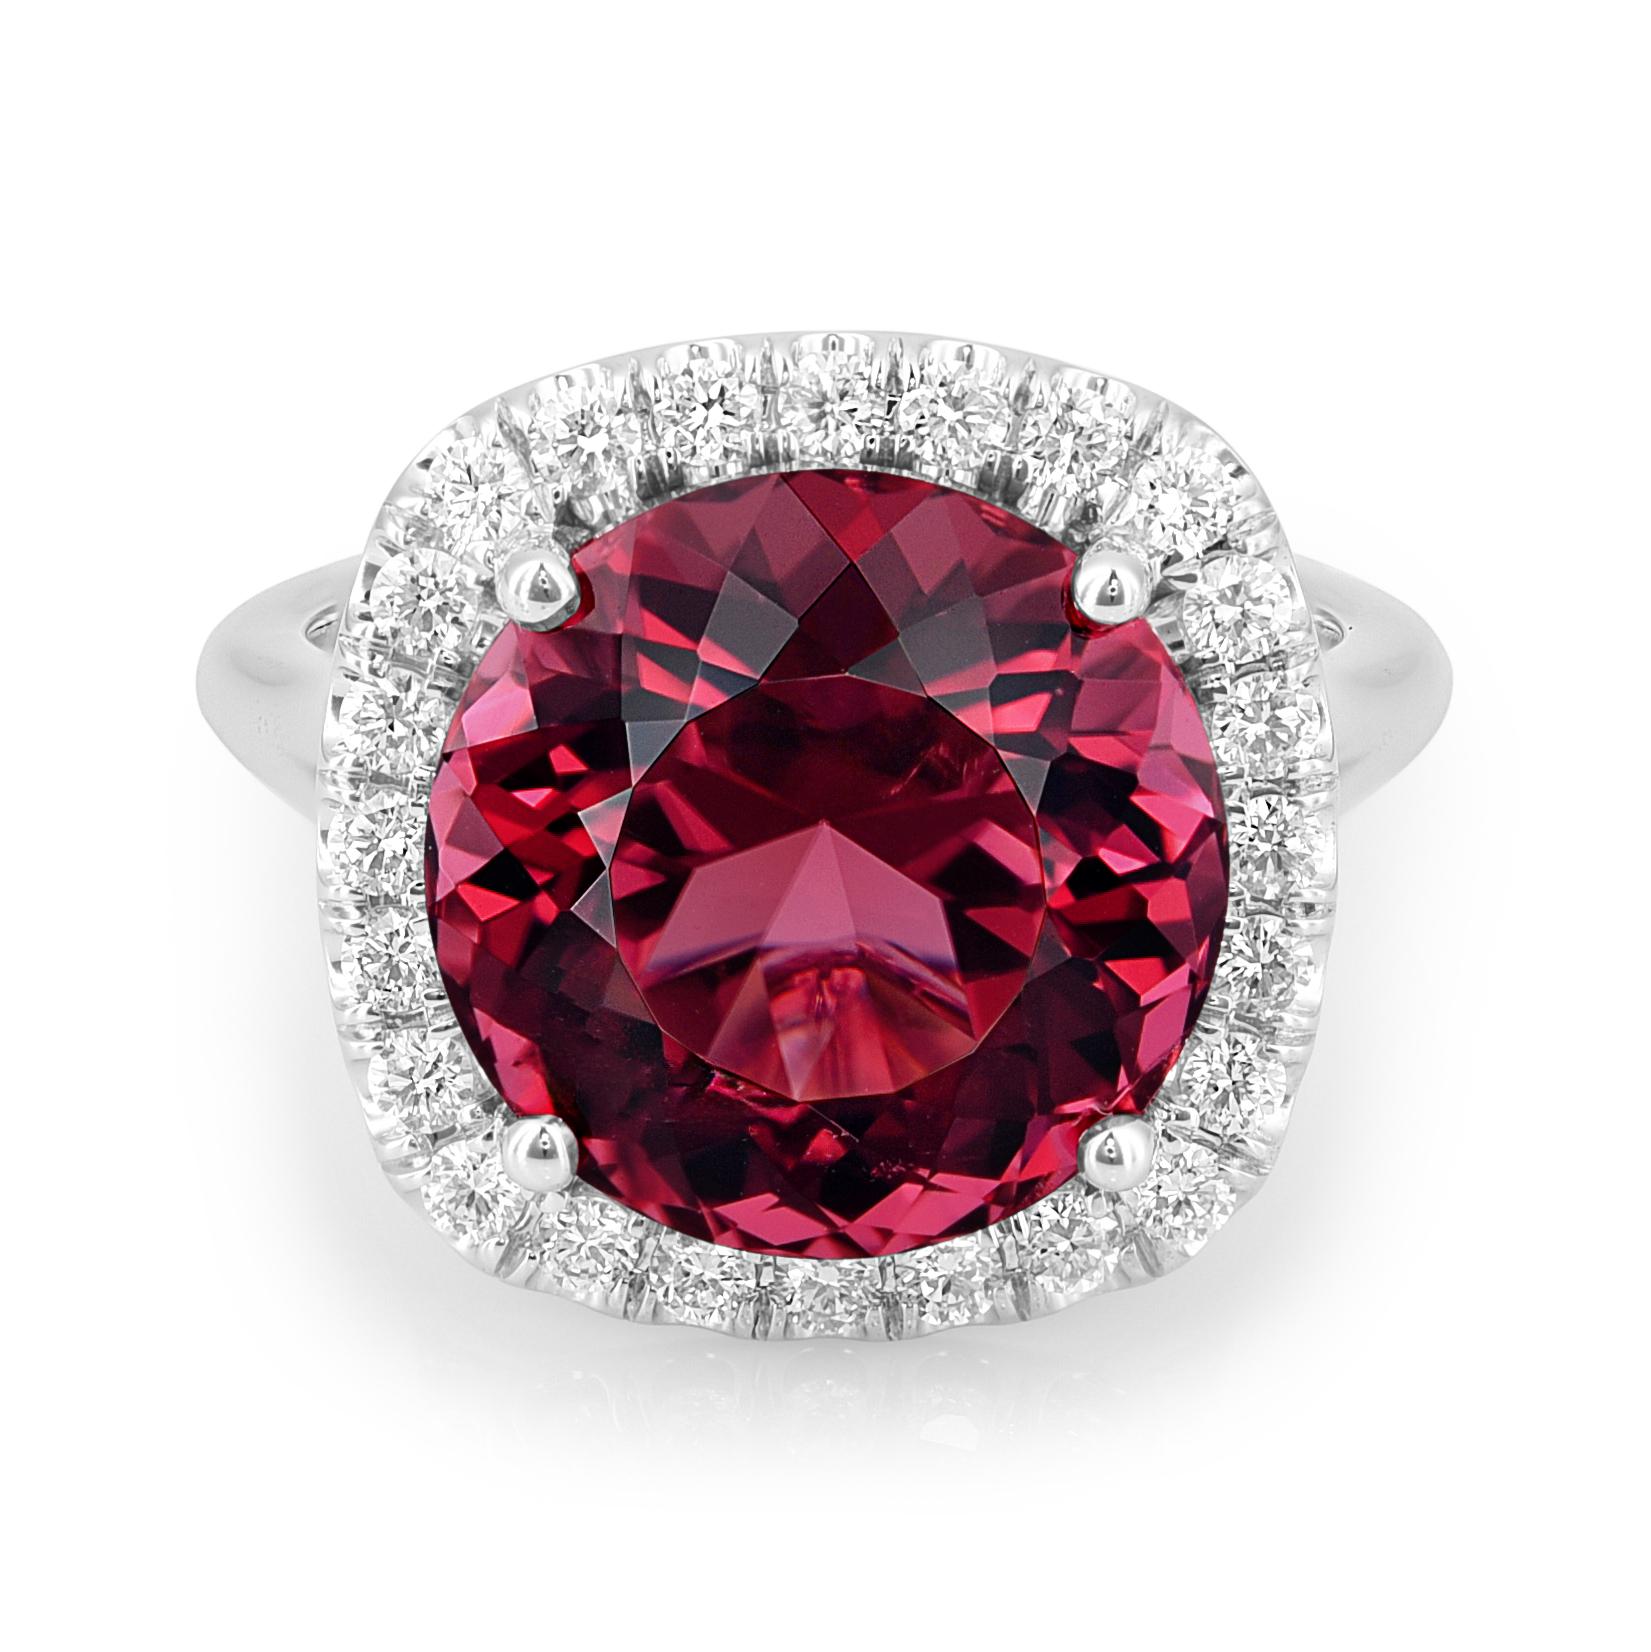 10.25 Сarats Red Tourmaline Diamonds set in 14K White Gold Ring In New Condition For Sale In Los Angeles, CA